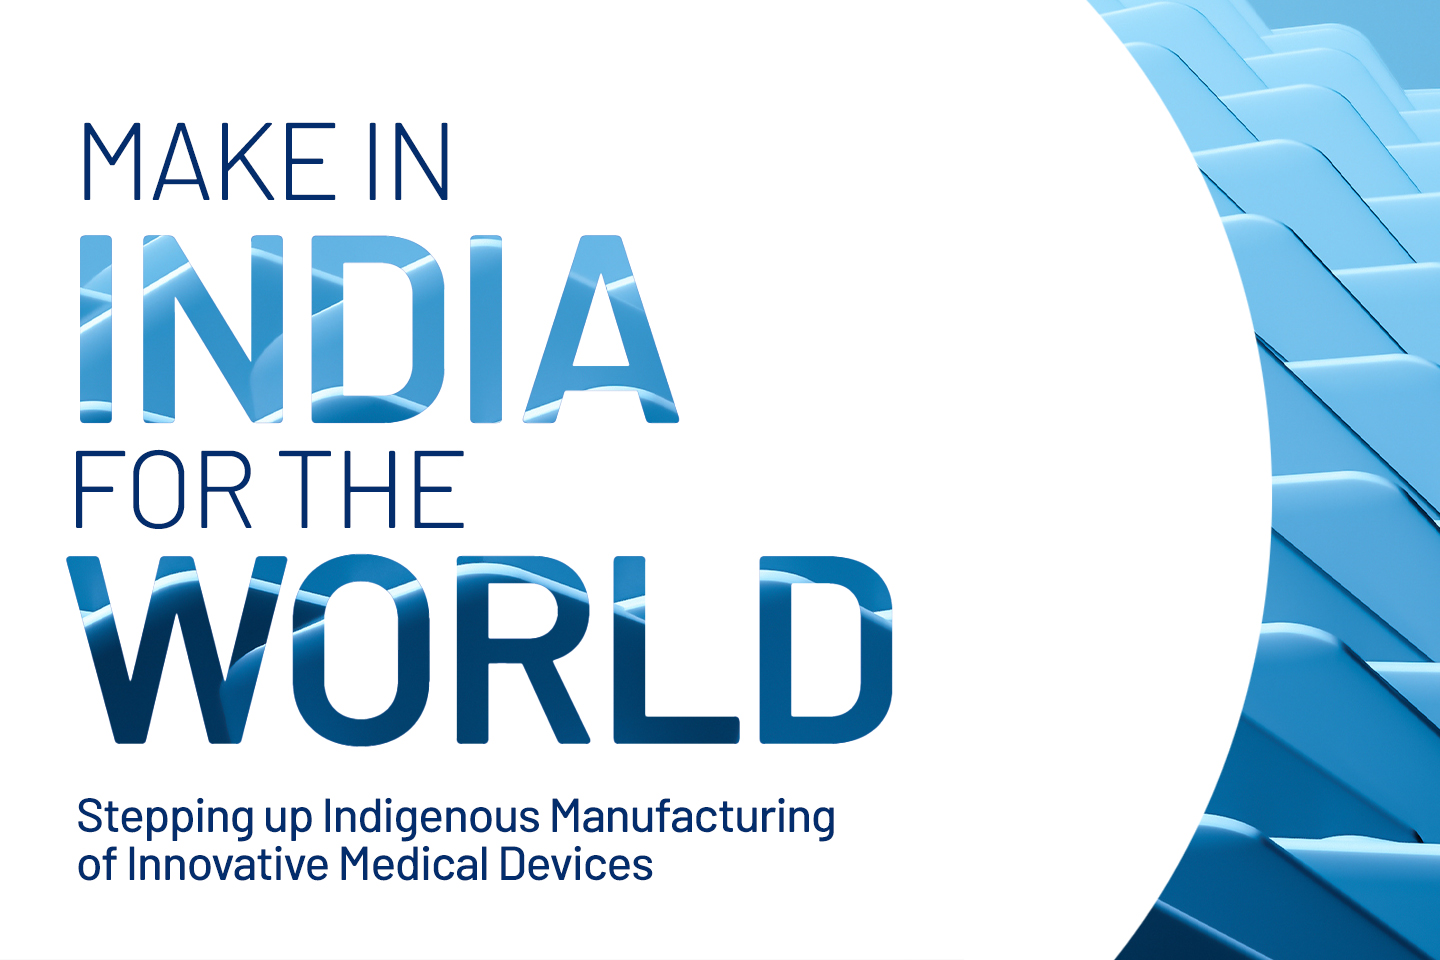 Make in India, for the World: Stepping up Indigenous Manufacturing of Innovative Medical Devices